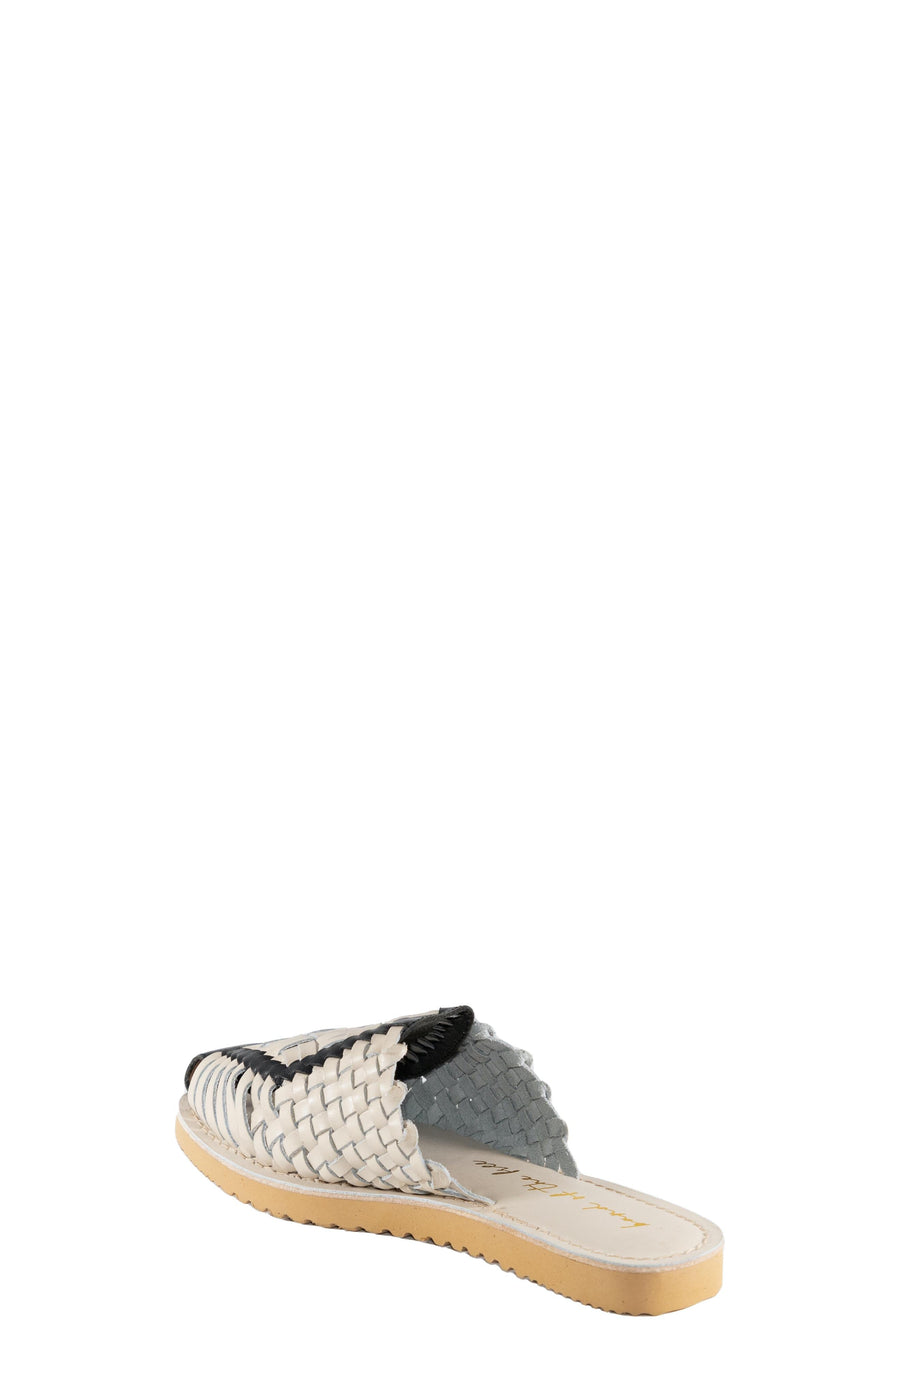 Comet Bone and Black Woven Leather Mule